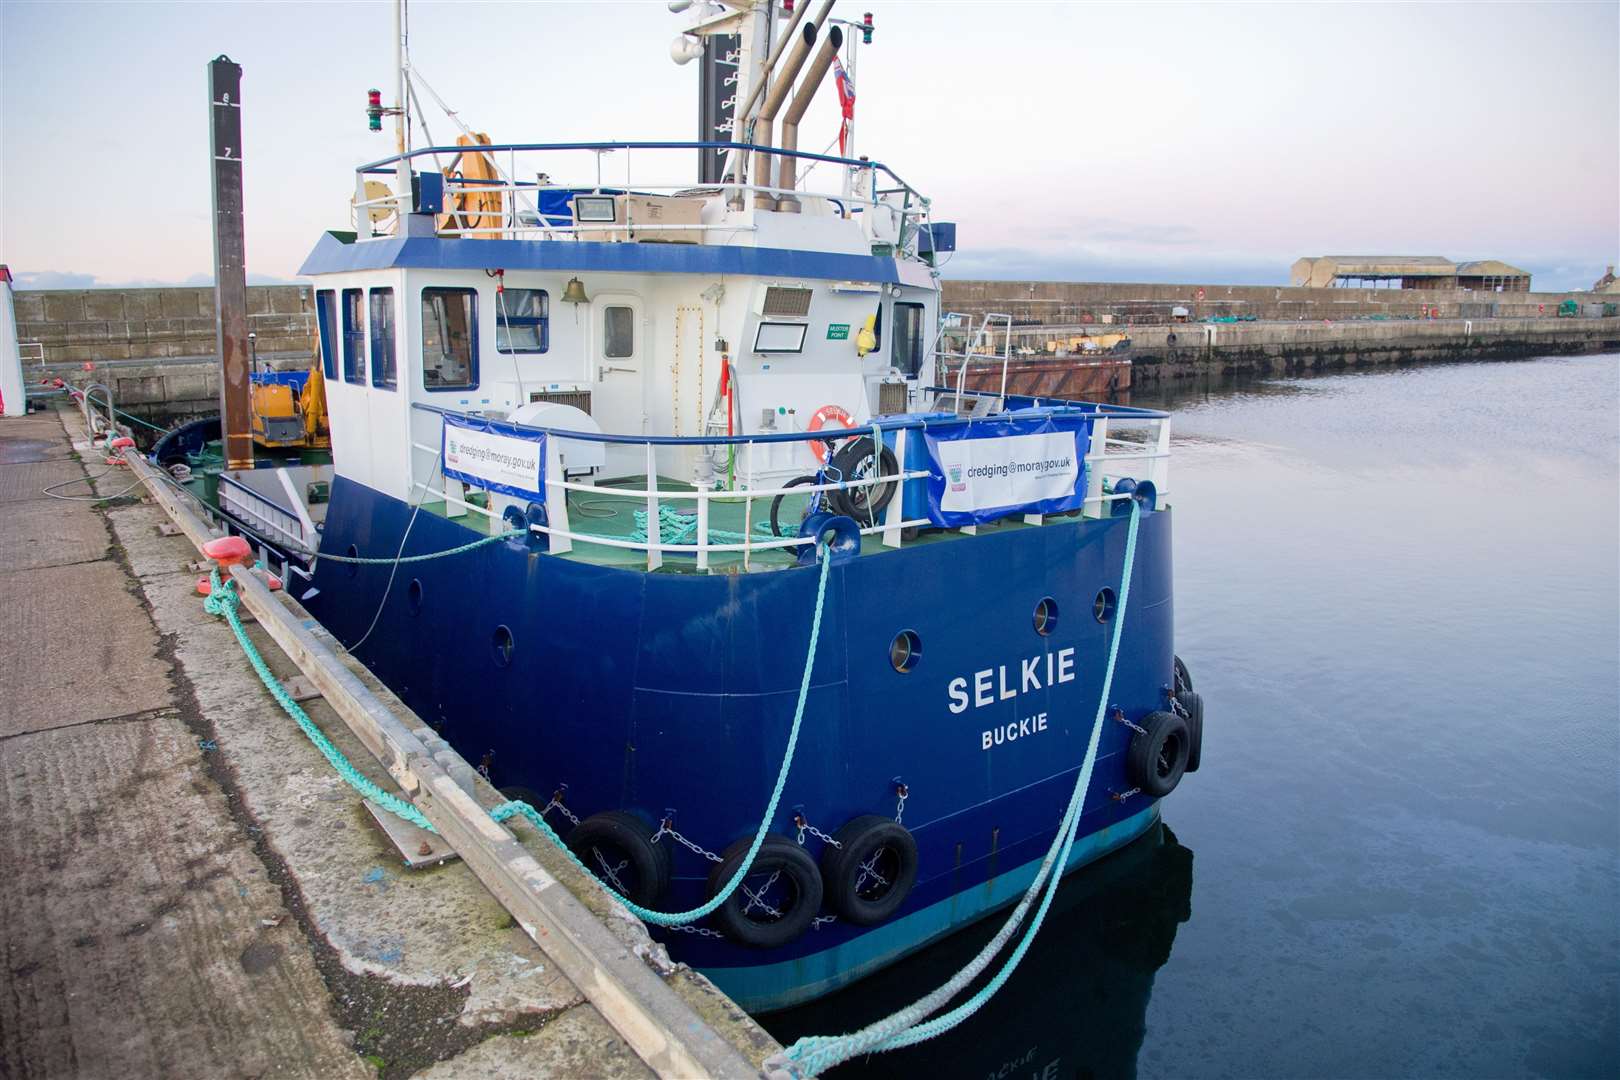 MV Selkie continues to be beset with problems.